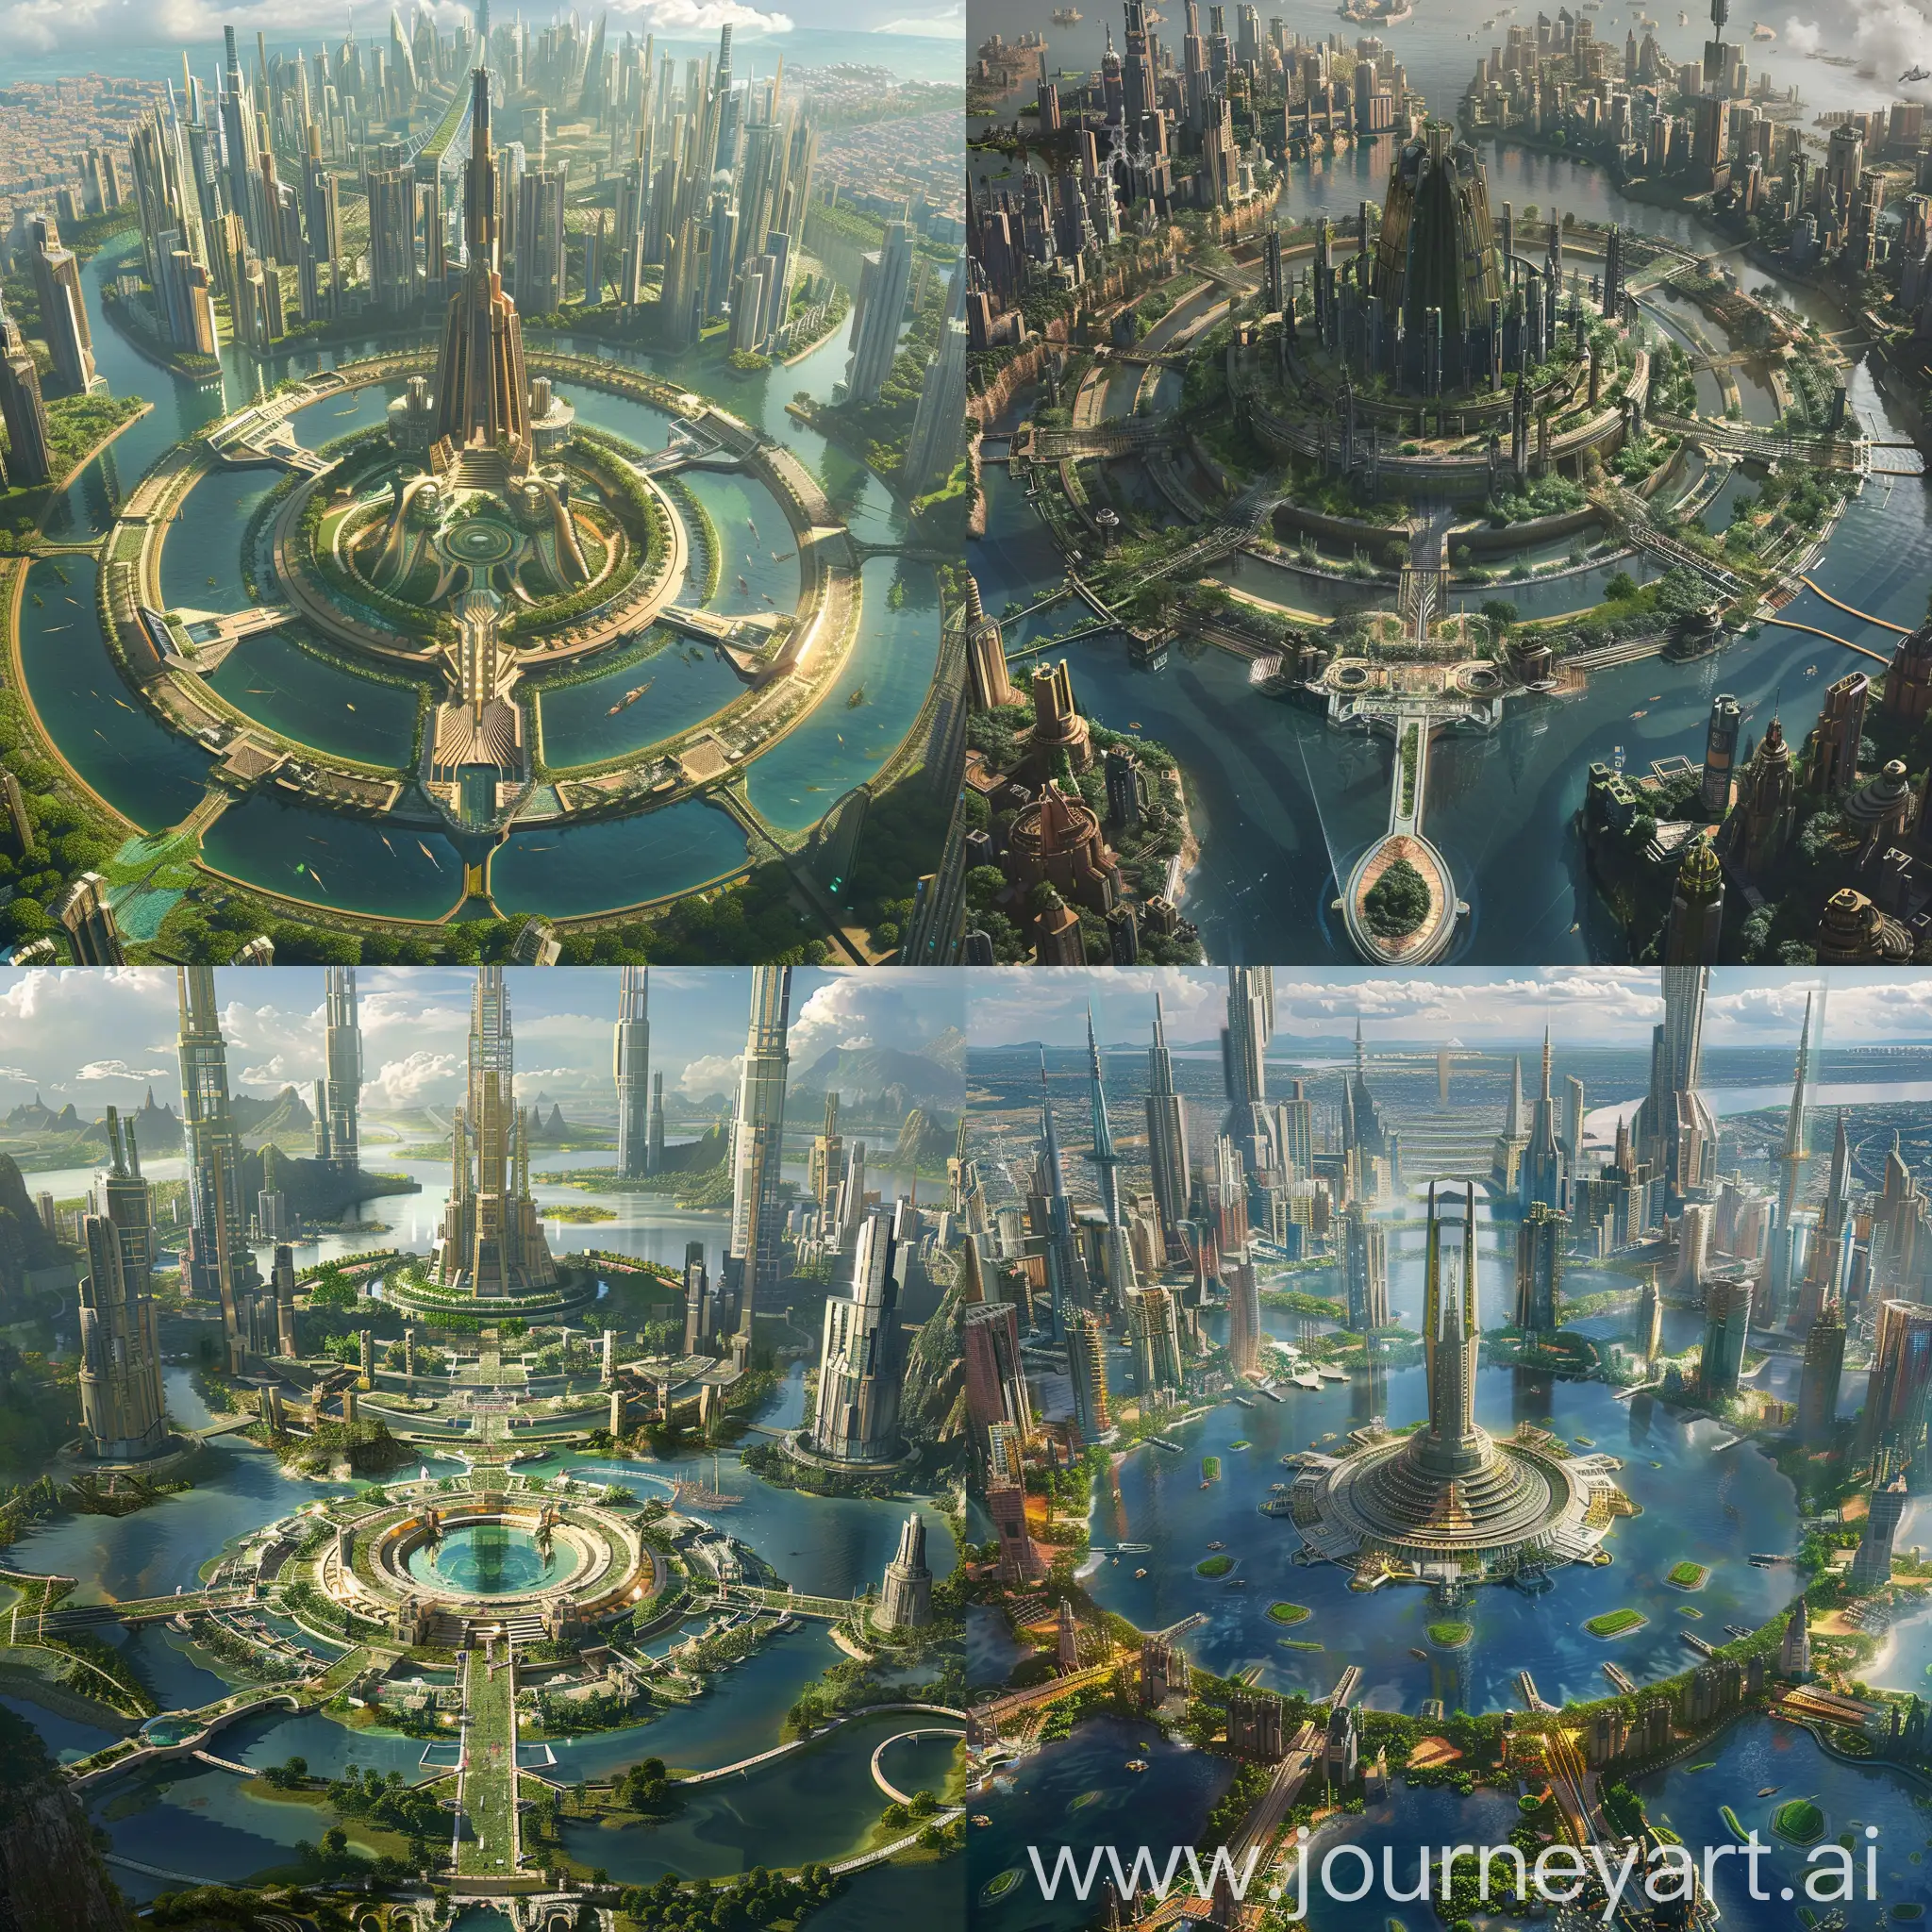 Futuristic-Metropolis-of-Atlantis-with-AfricanInspired-Cultural-Details